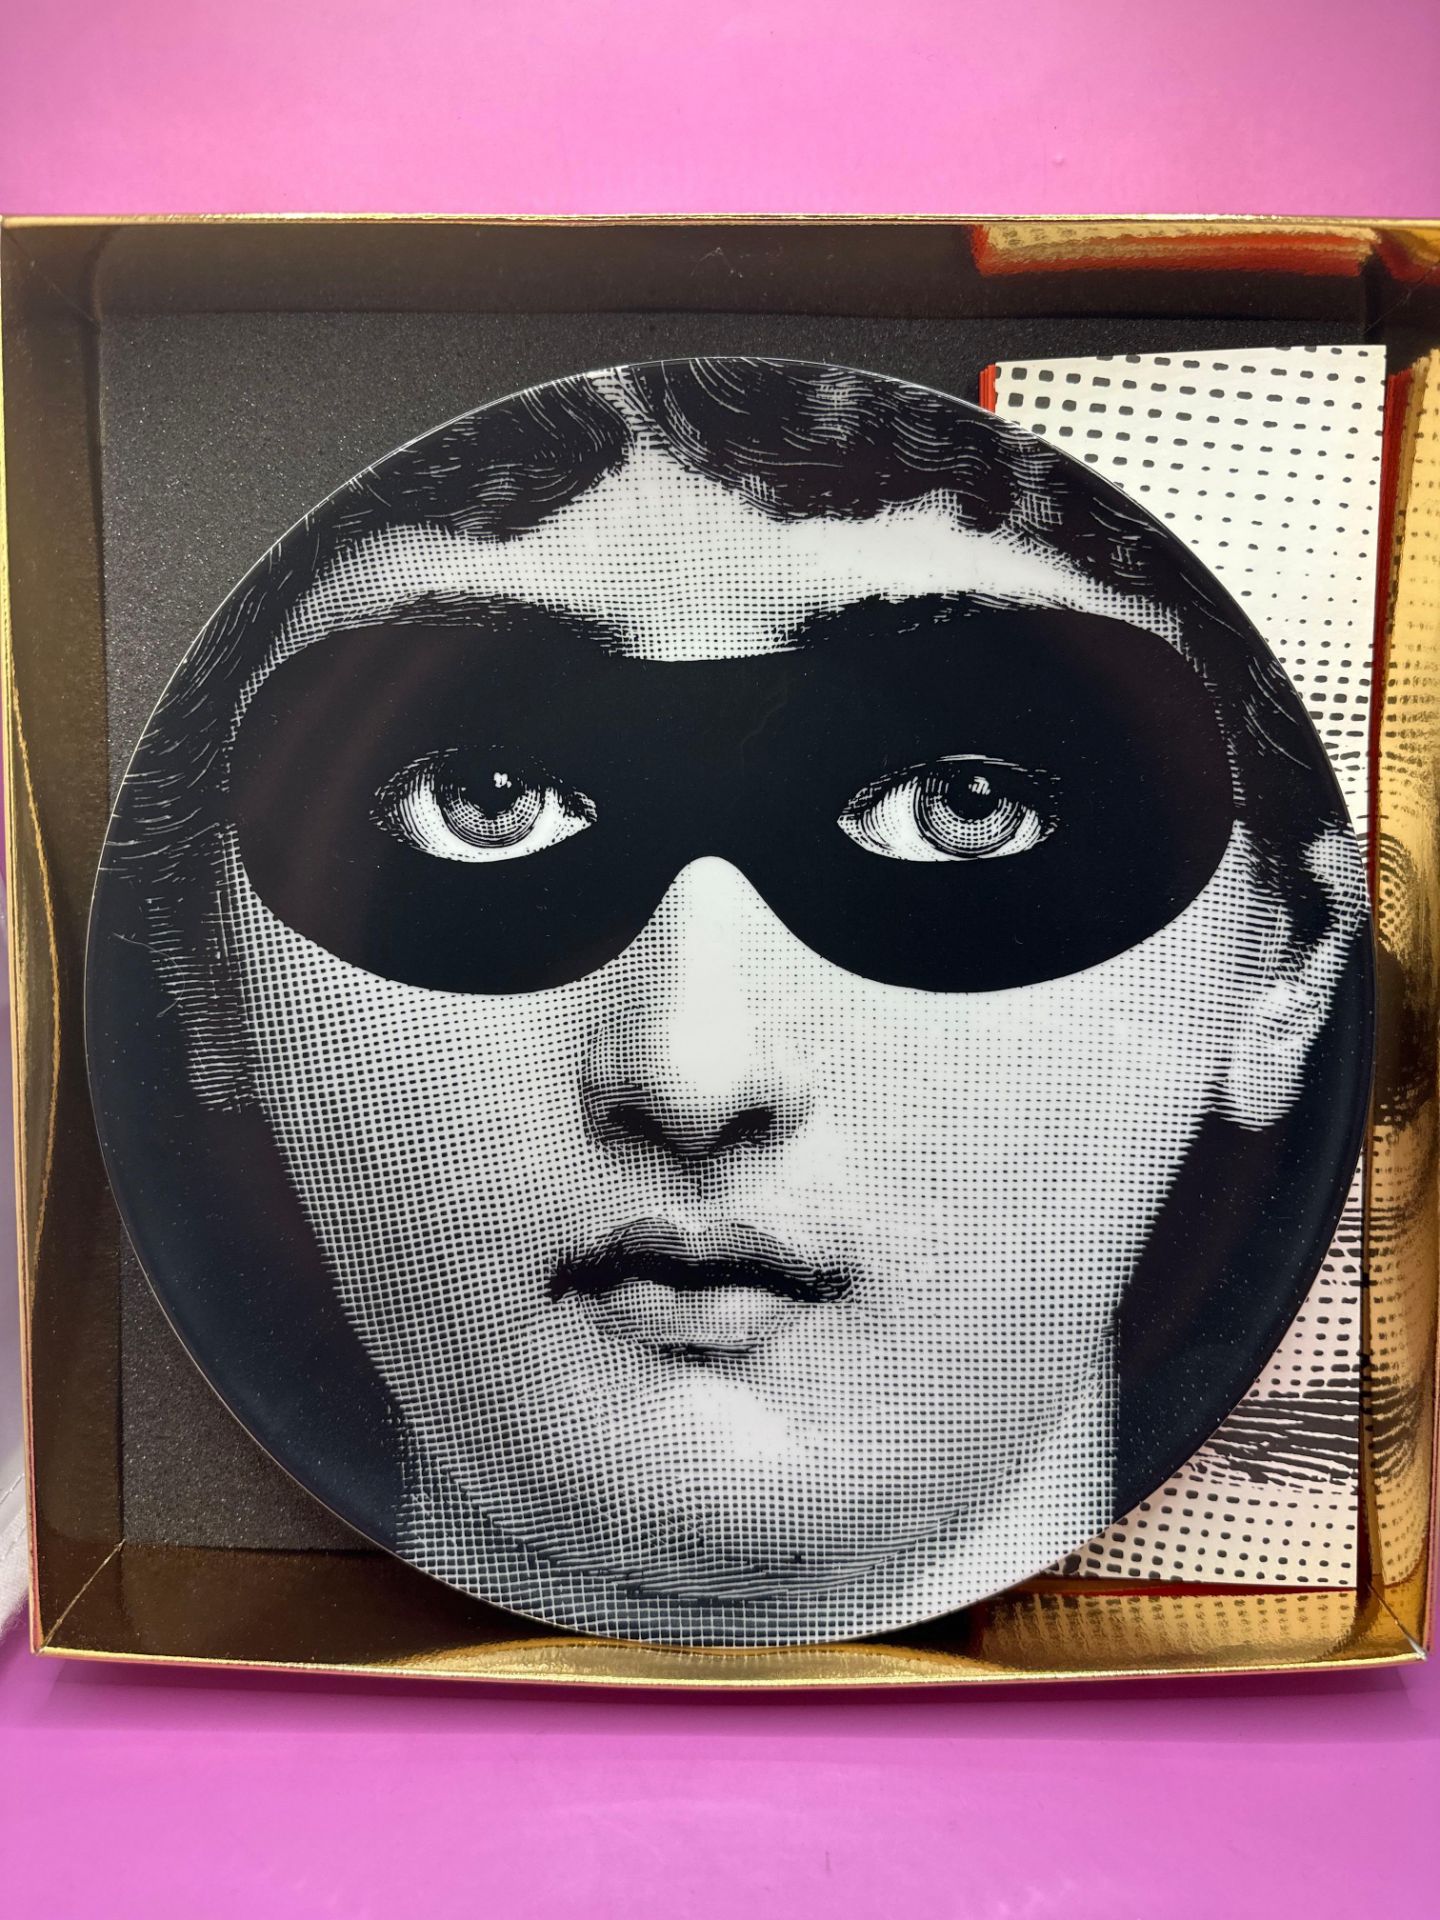 Fornasetti Italy Porcelain Tema E Variazioni No. 22 Wall Plate Presented In A Fornasetti Box The